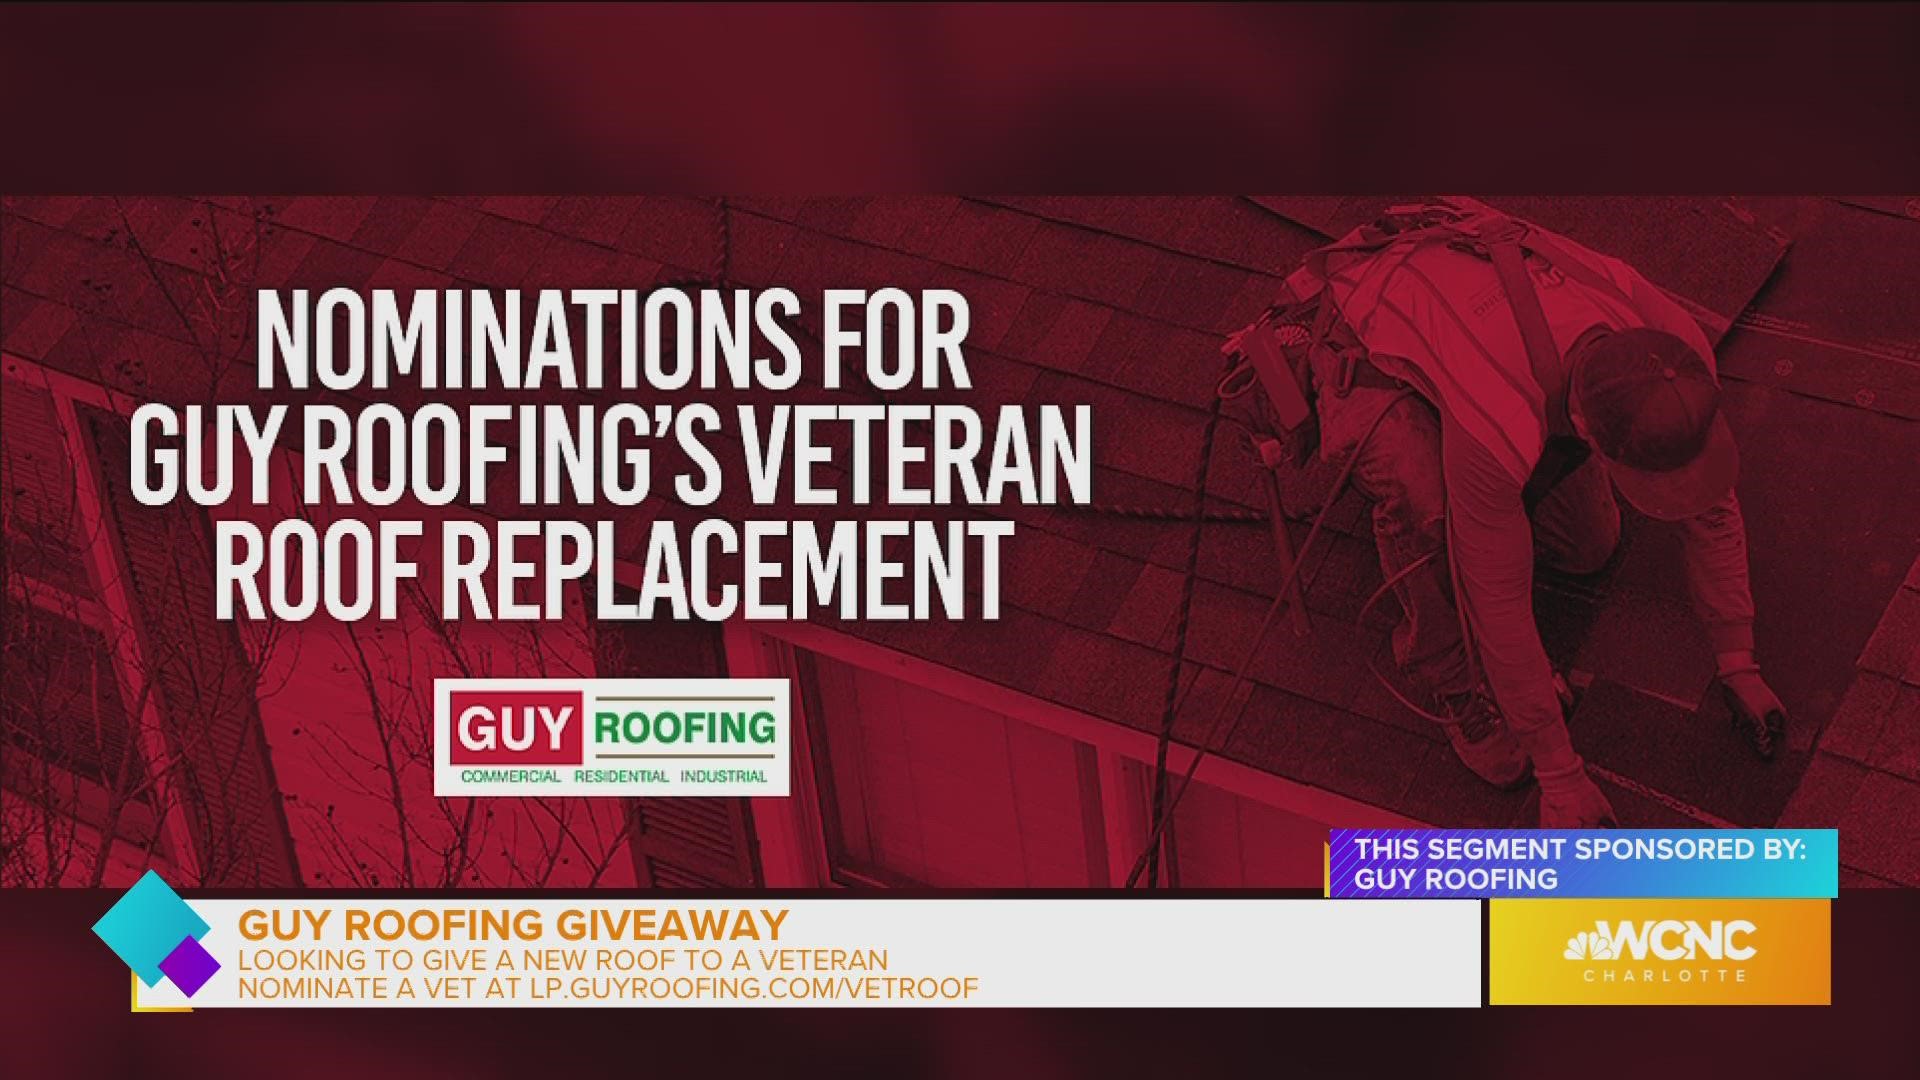 Head to the Guy Roofing website for more